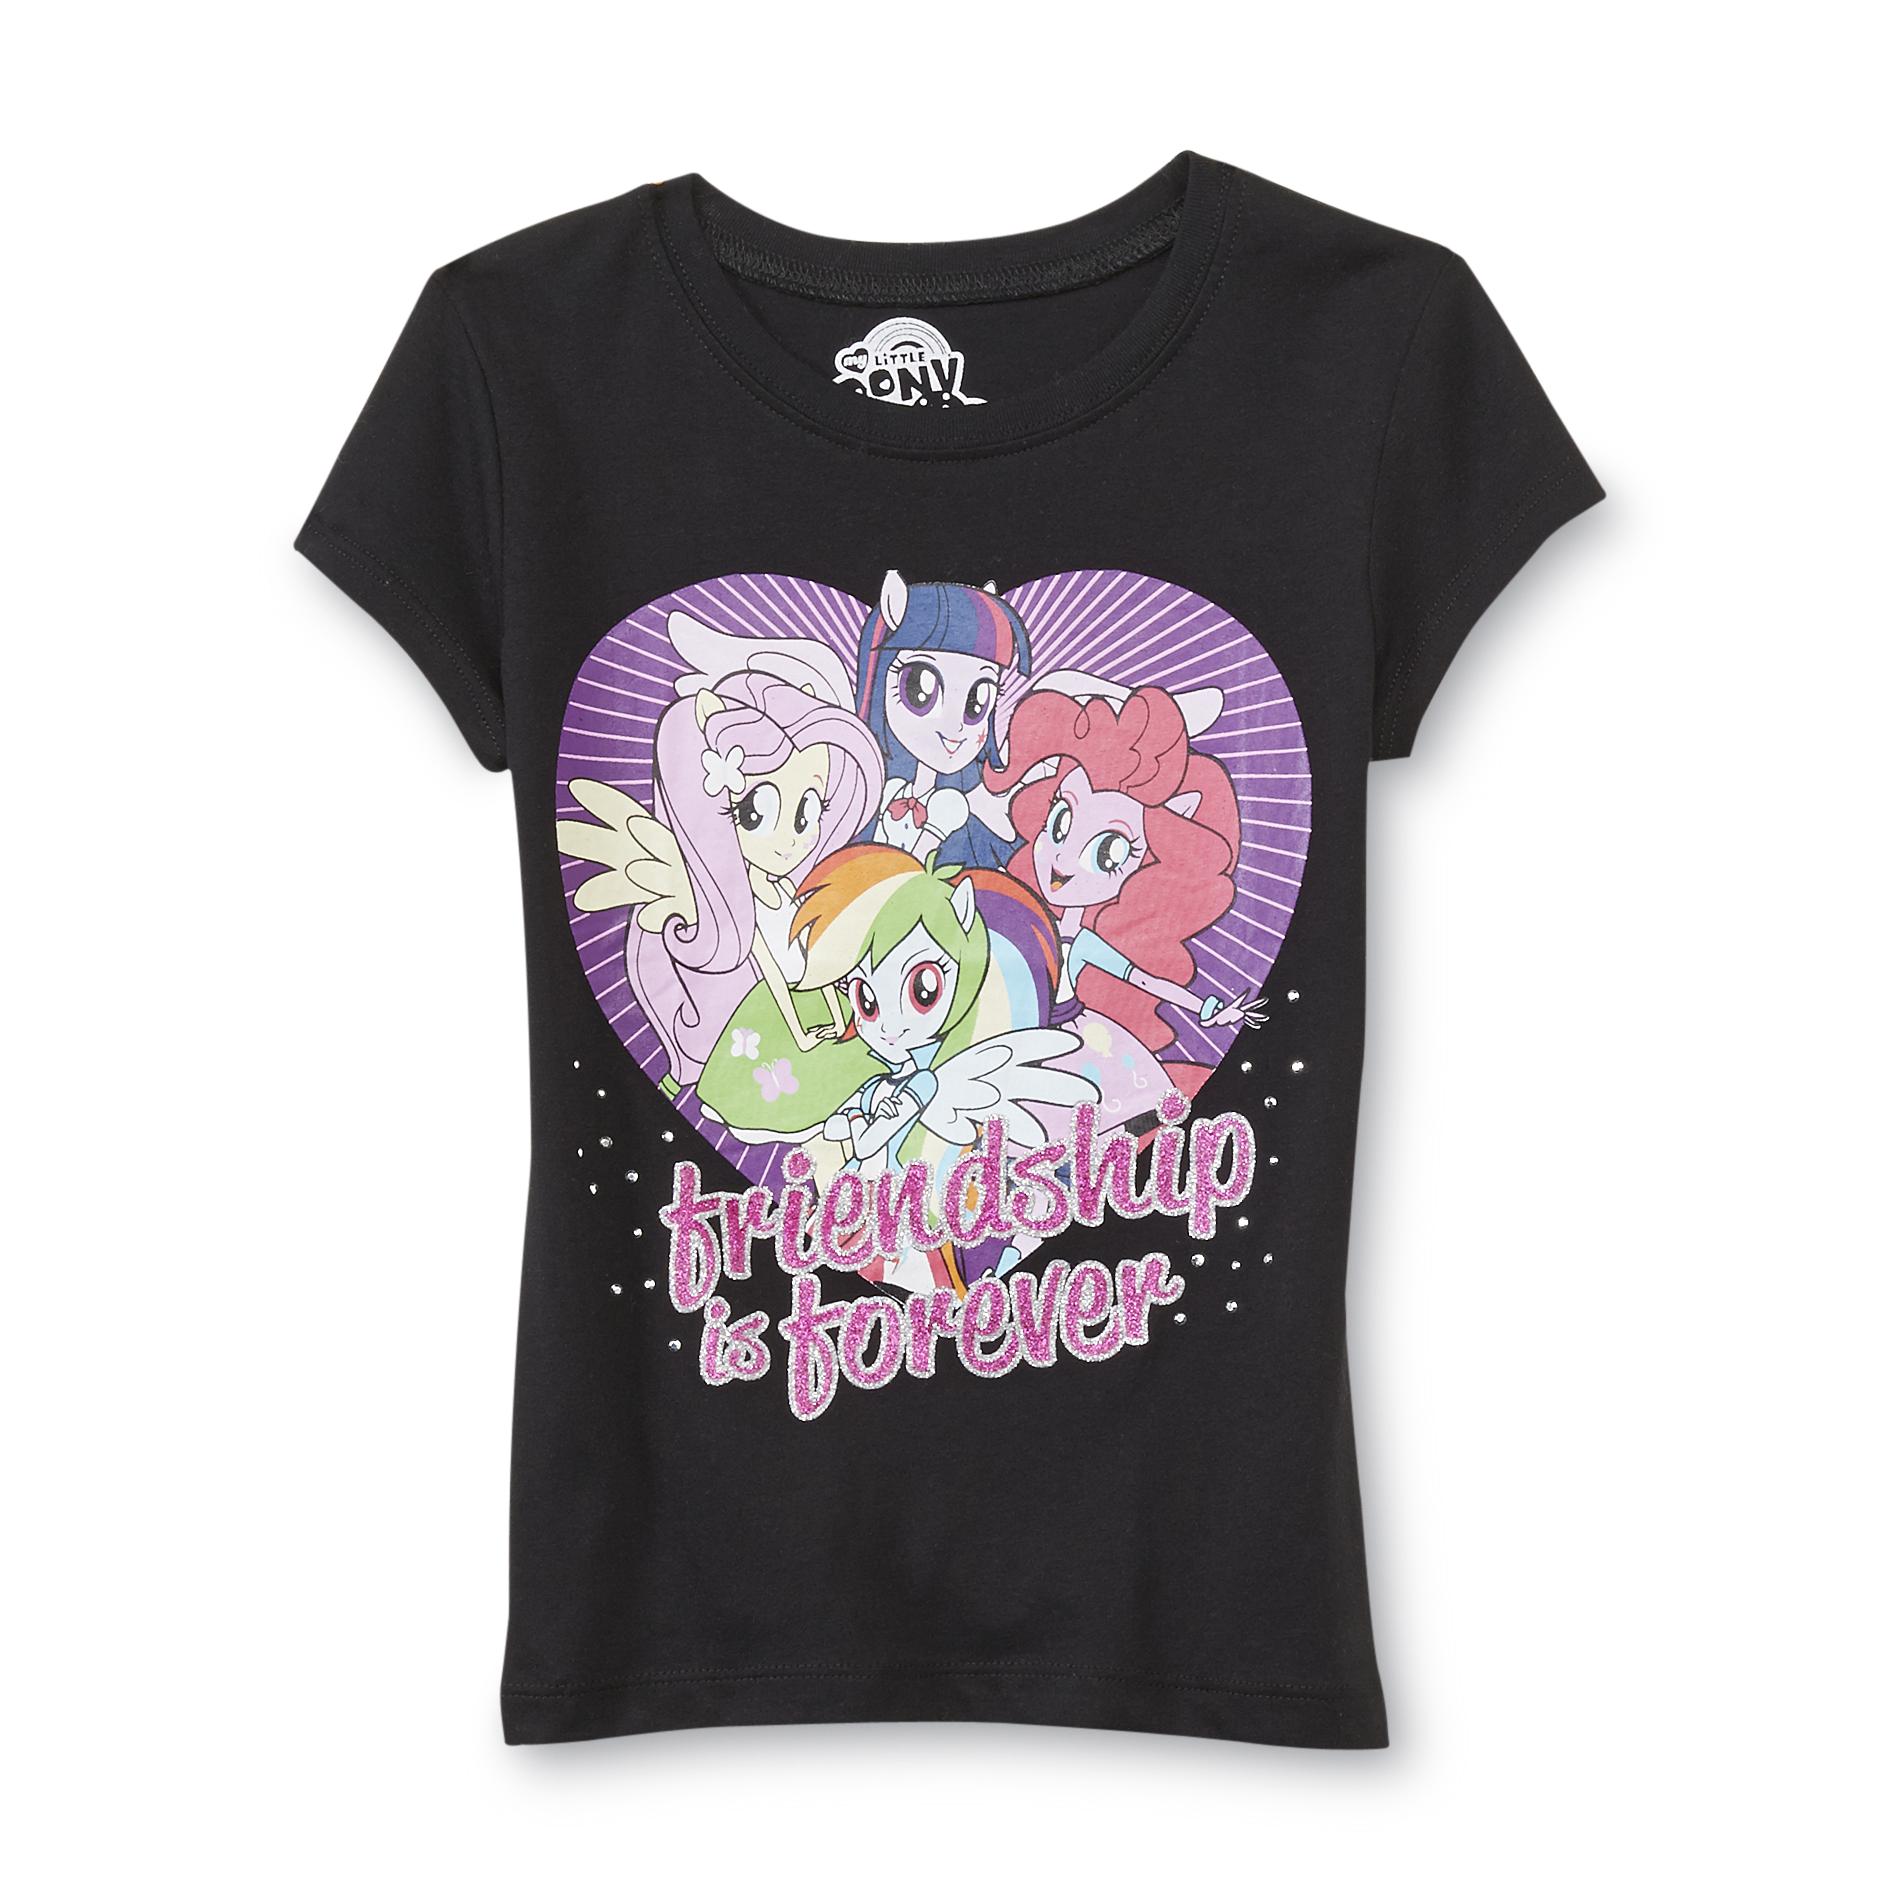 My Little Pony Equestria Girls Girl's Top - Friendship Is Forever